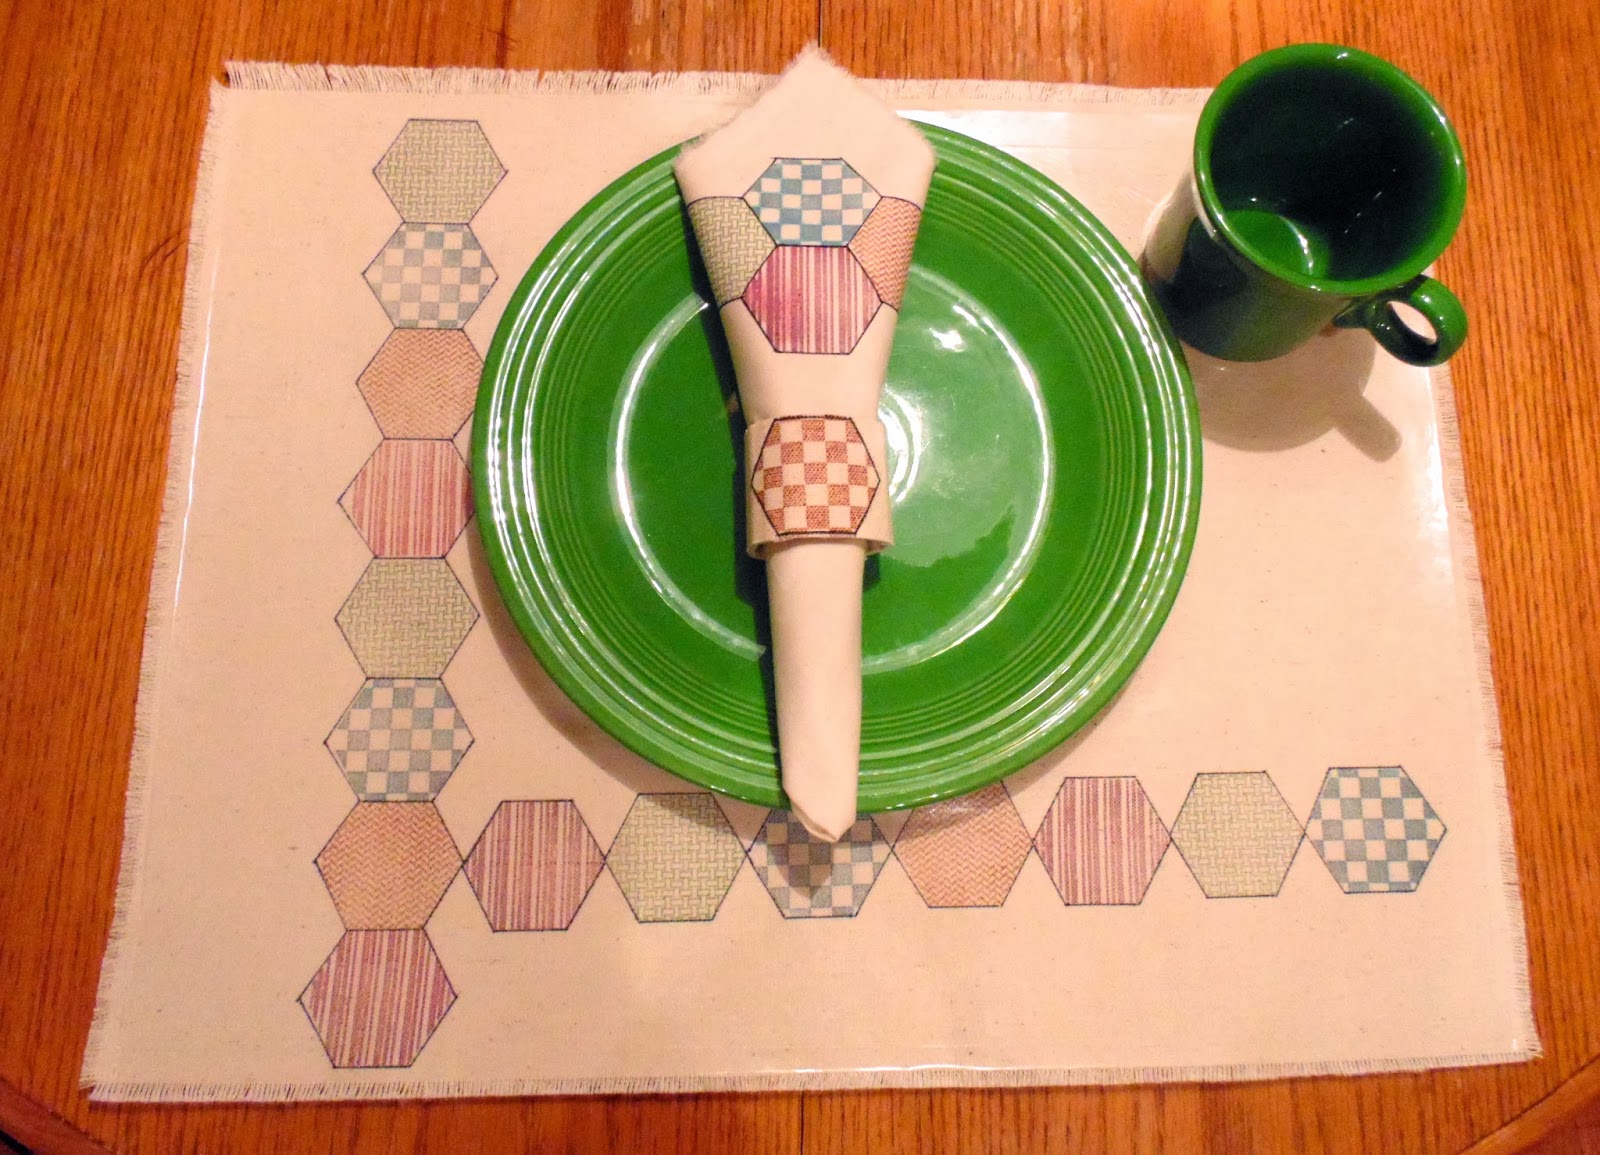 ABD-diy-project-Stamped-Placemat-MadelineArendt